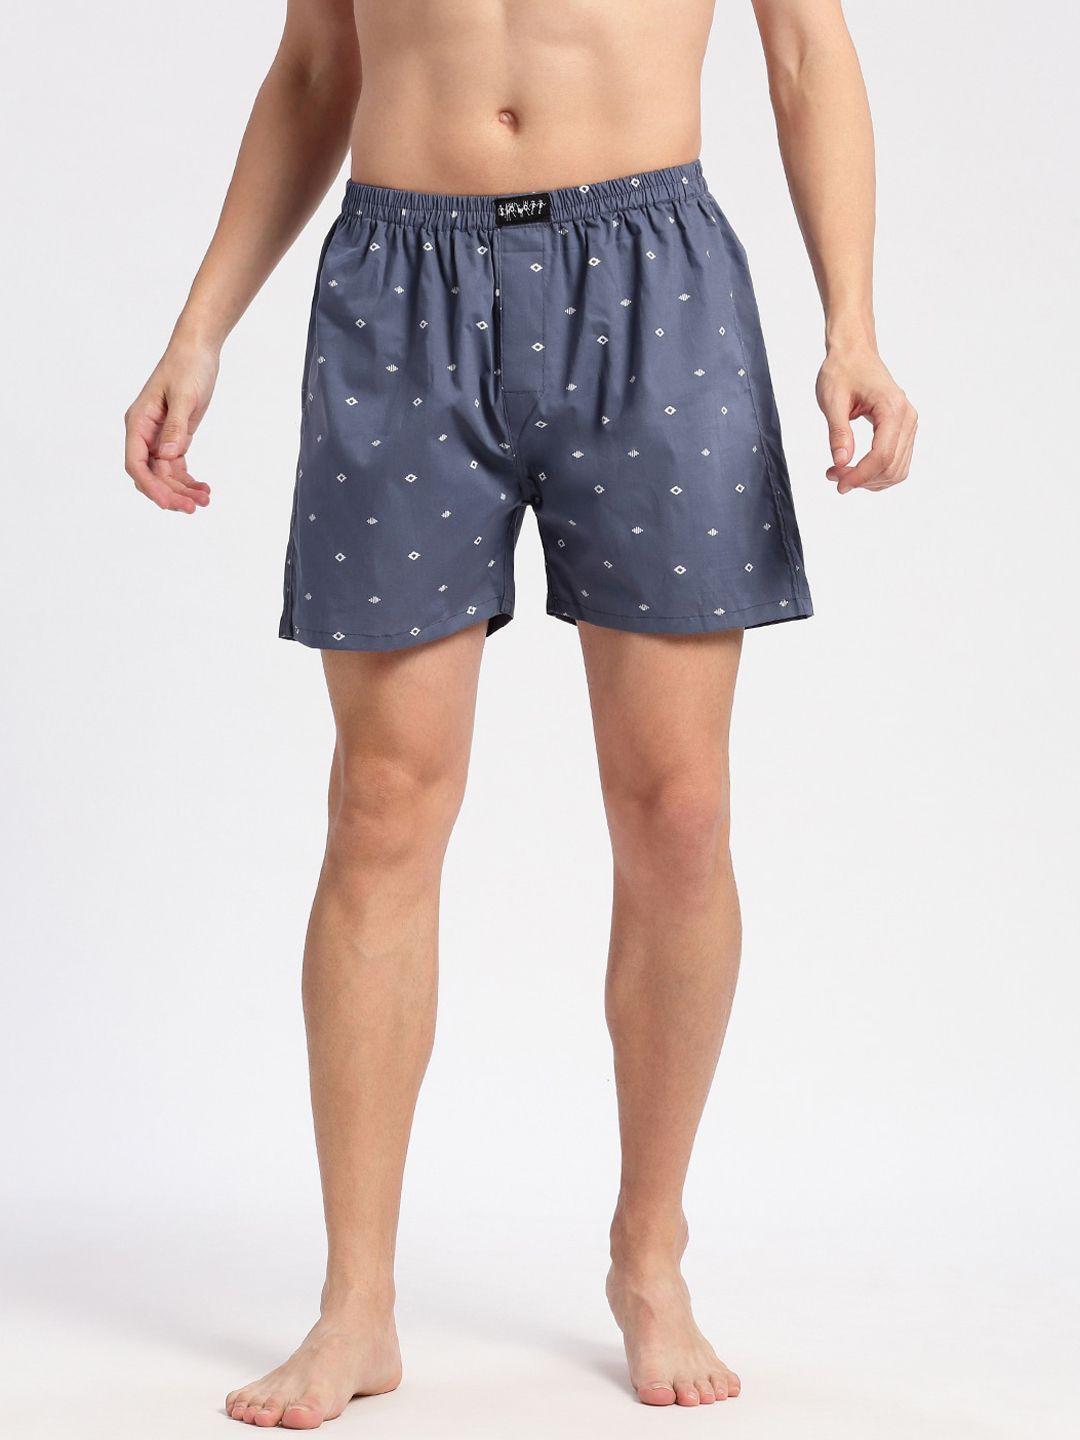 showoff geometric printed cotton boxers am-141-12